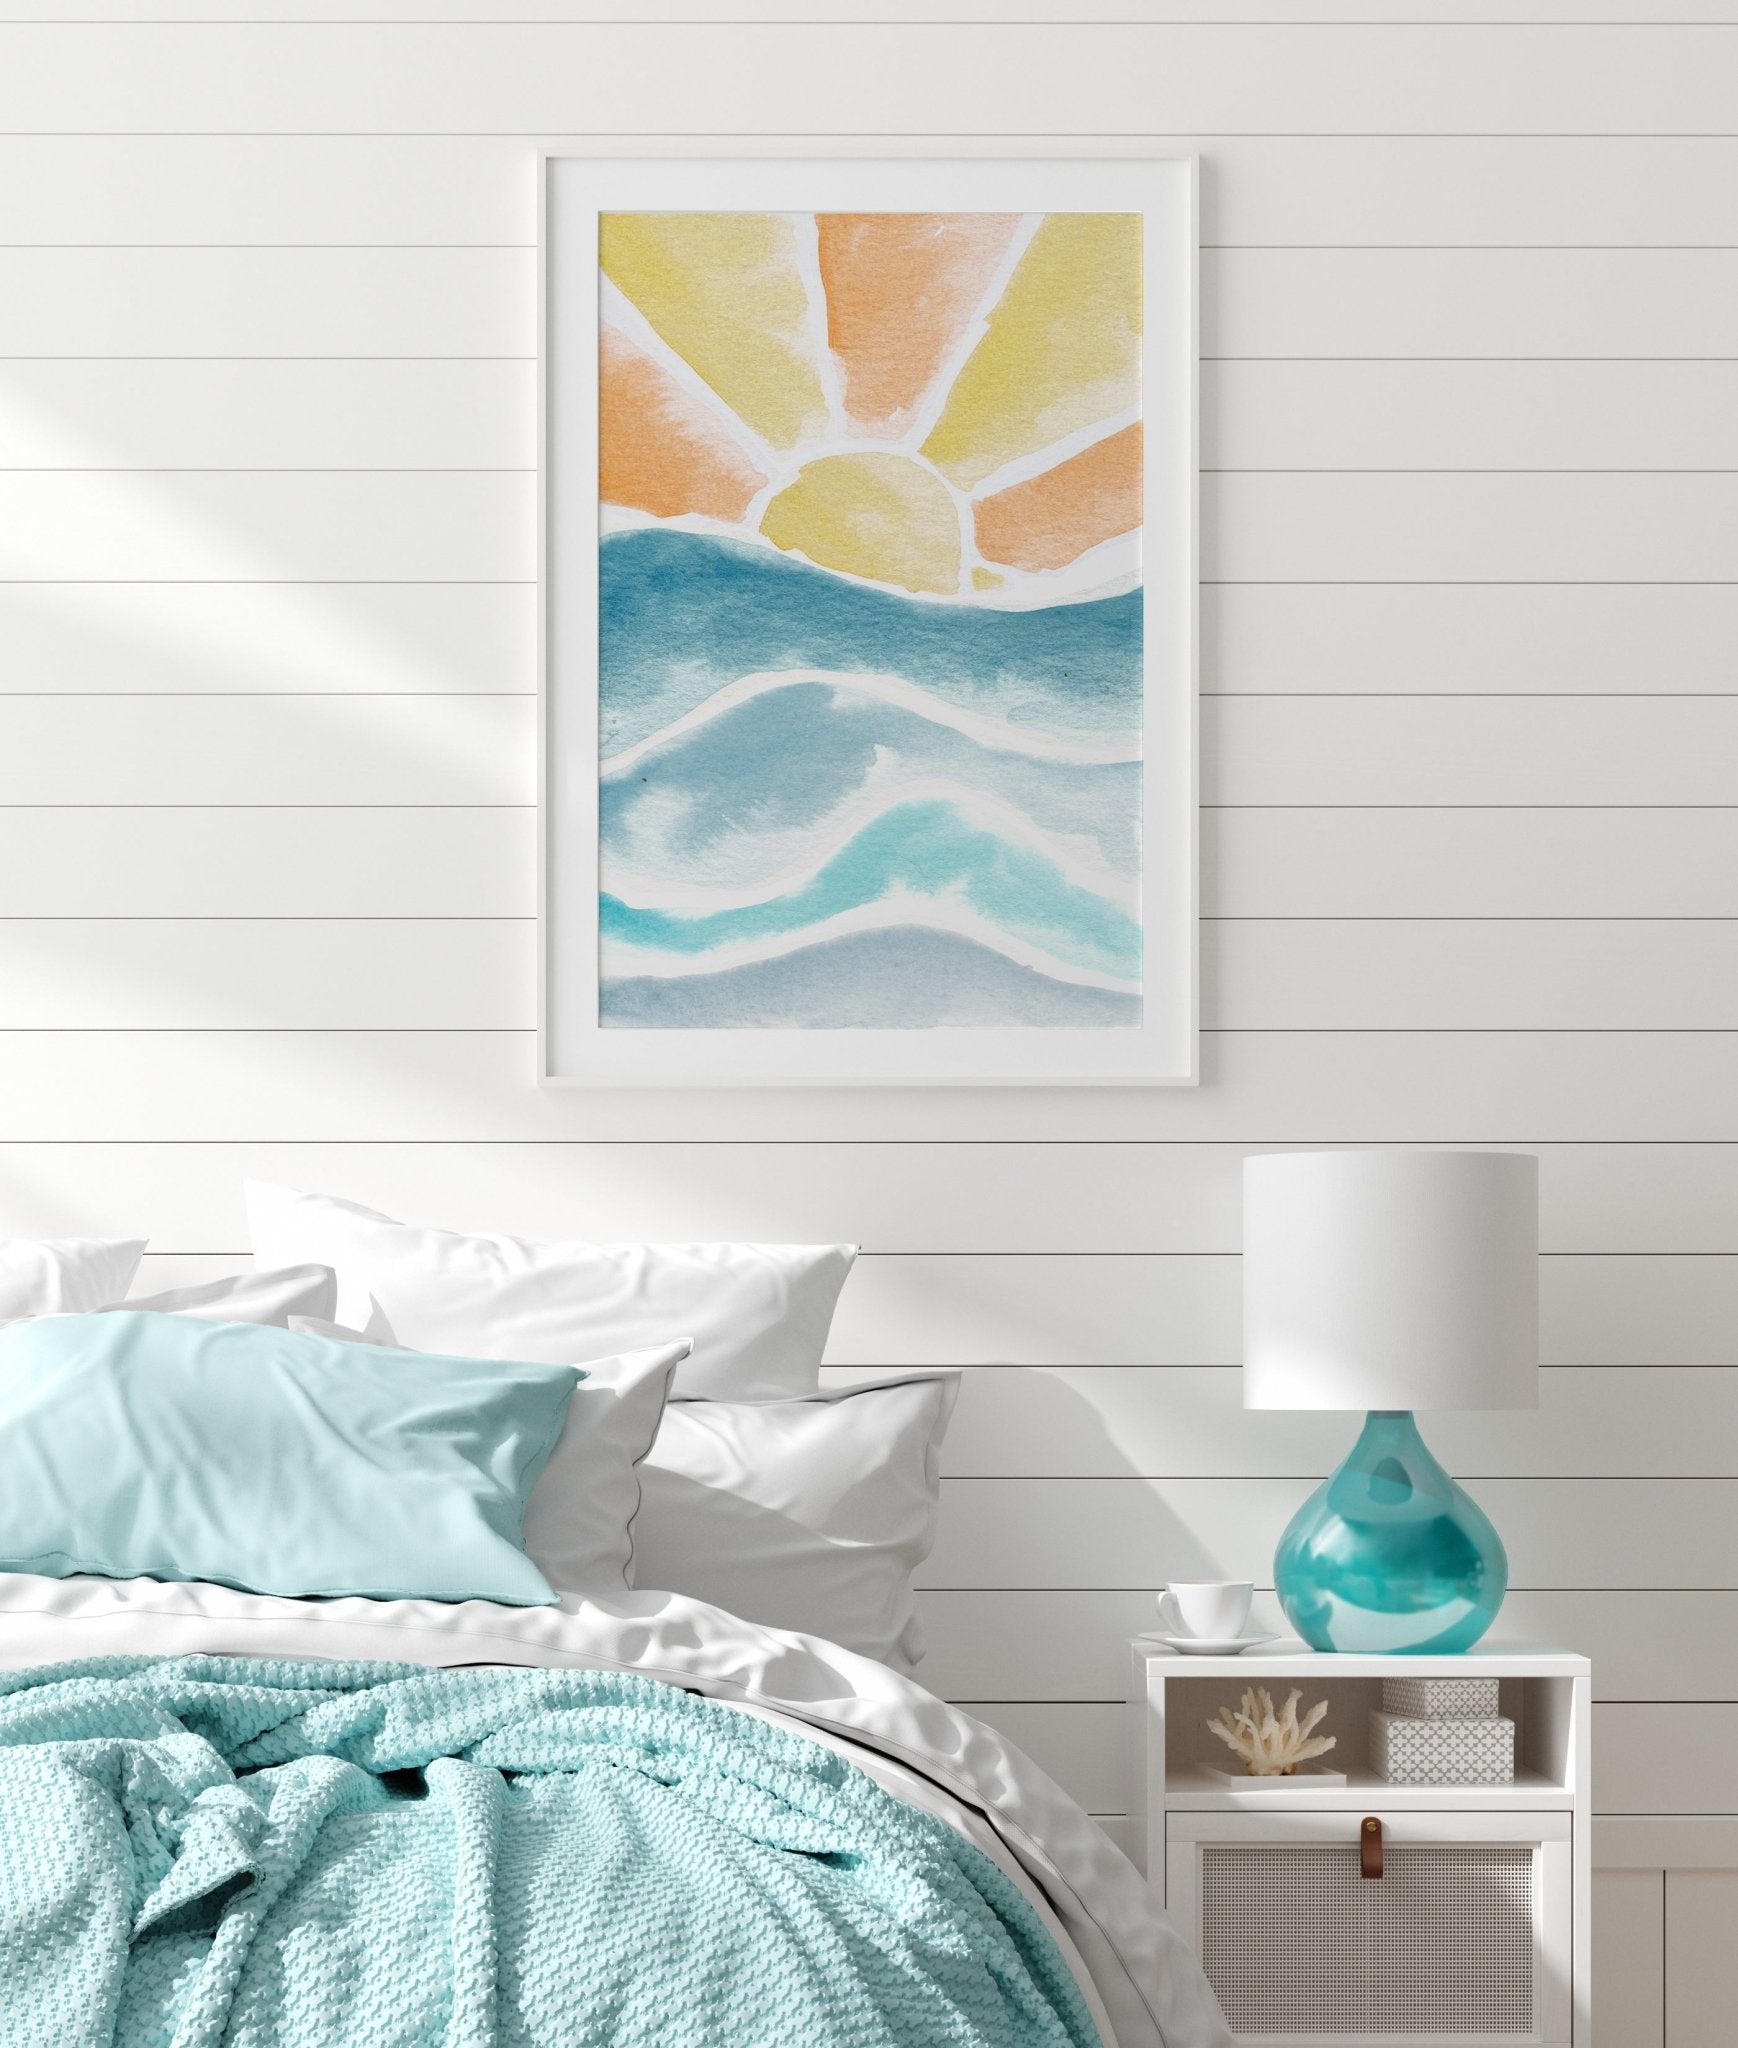 Ocean Sunset Watercolor Print Hanging Above Bed as beach house decor